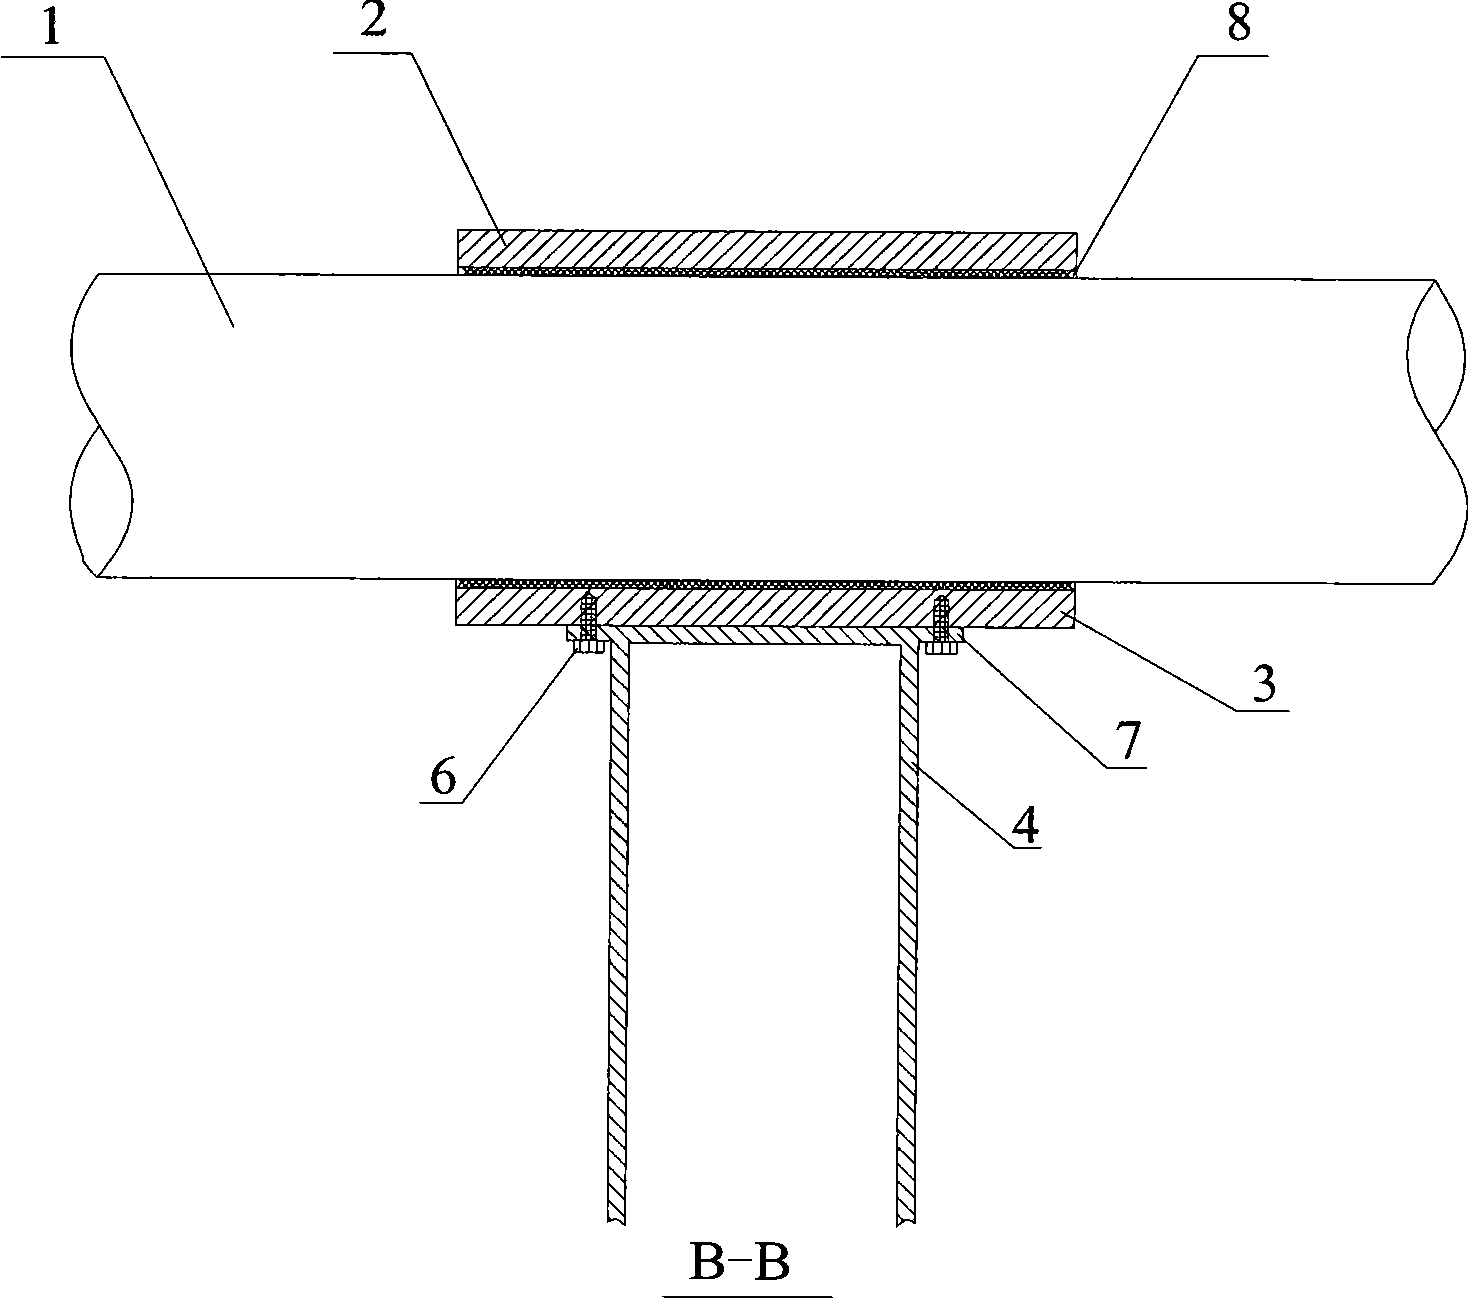 Method for fixing seabed pipeline and preventing buckle propagation